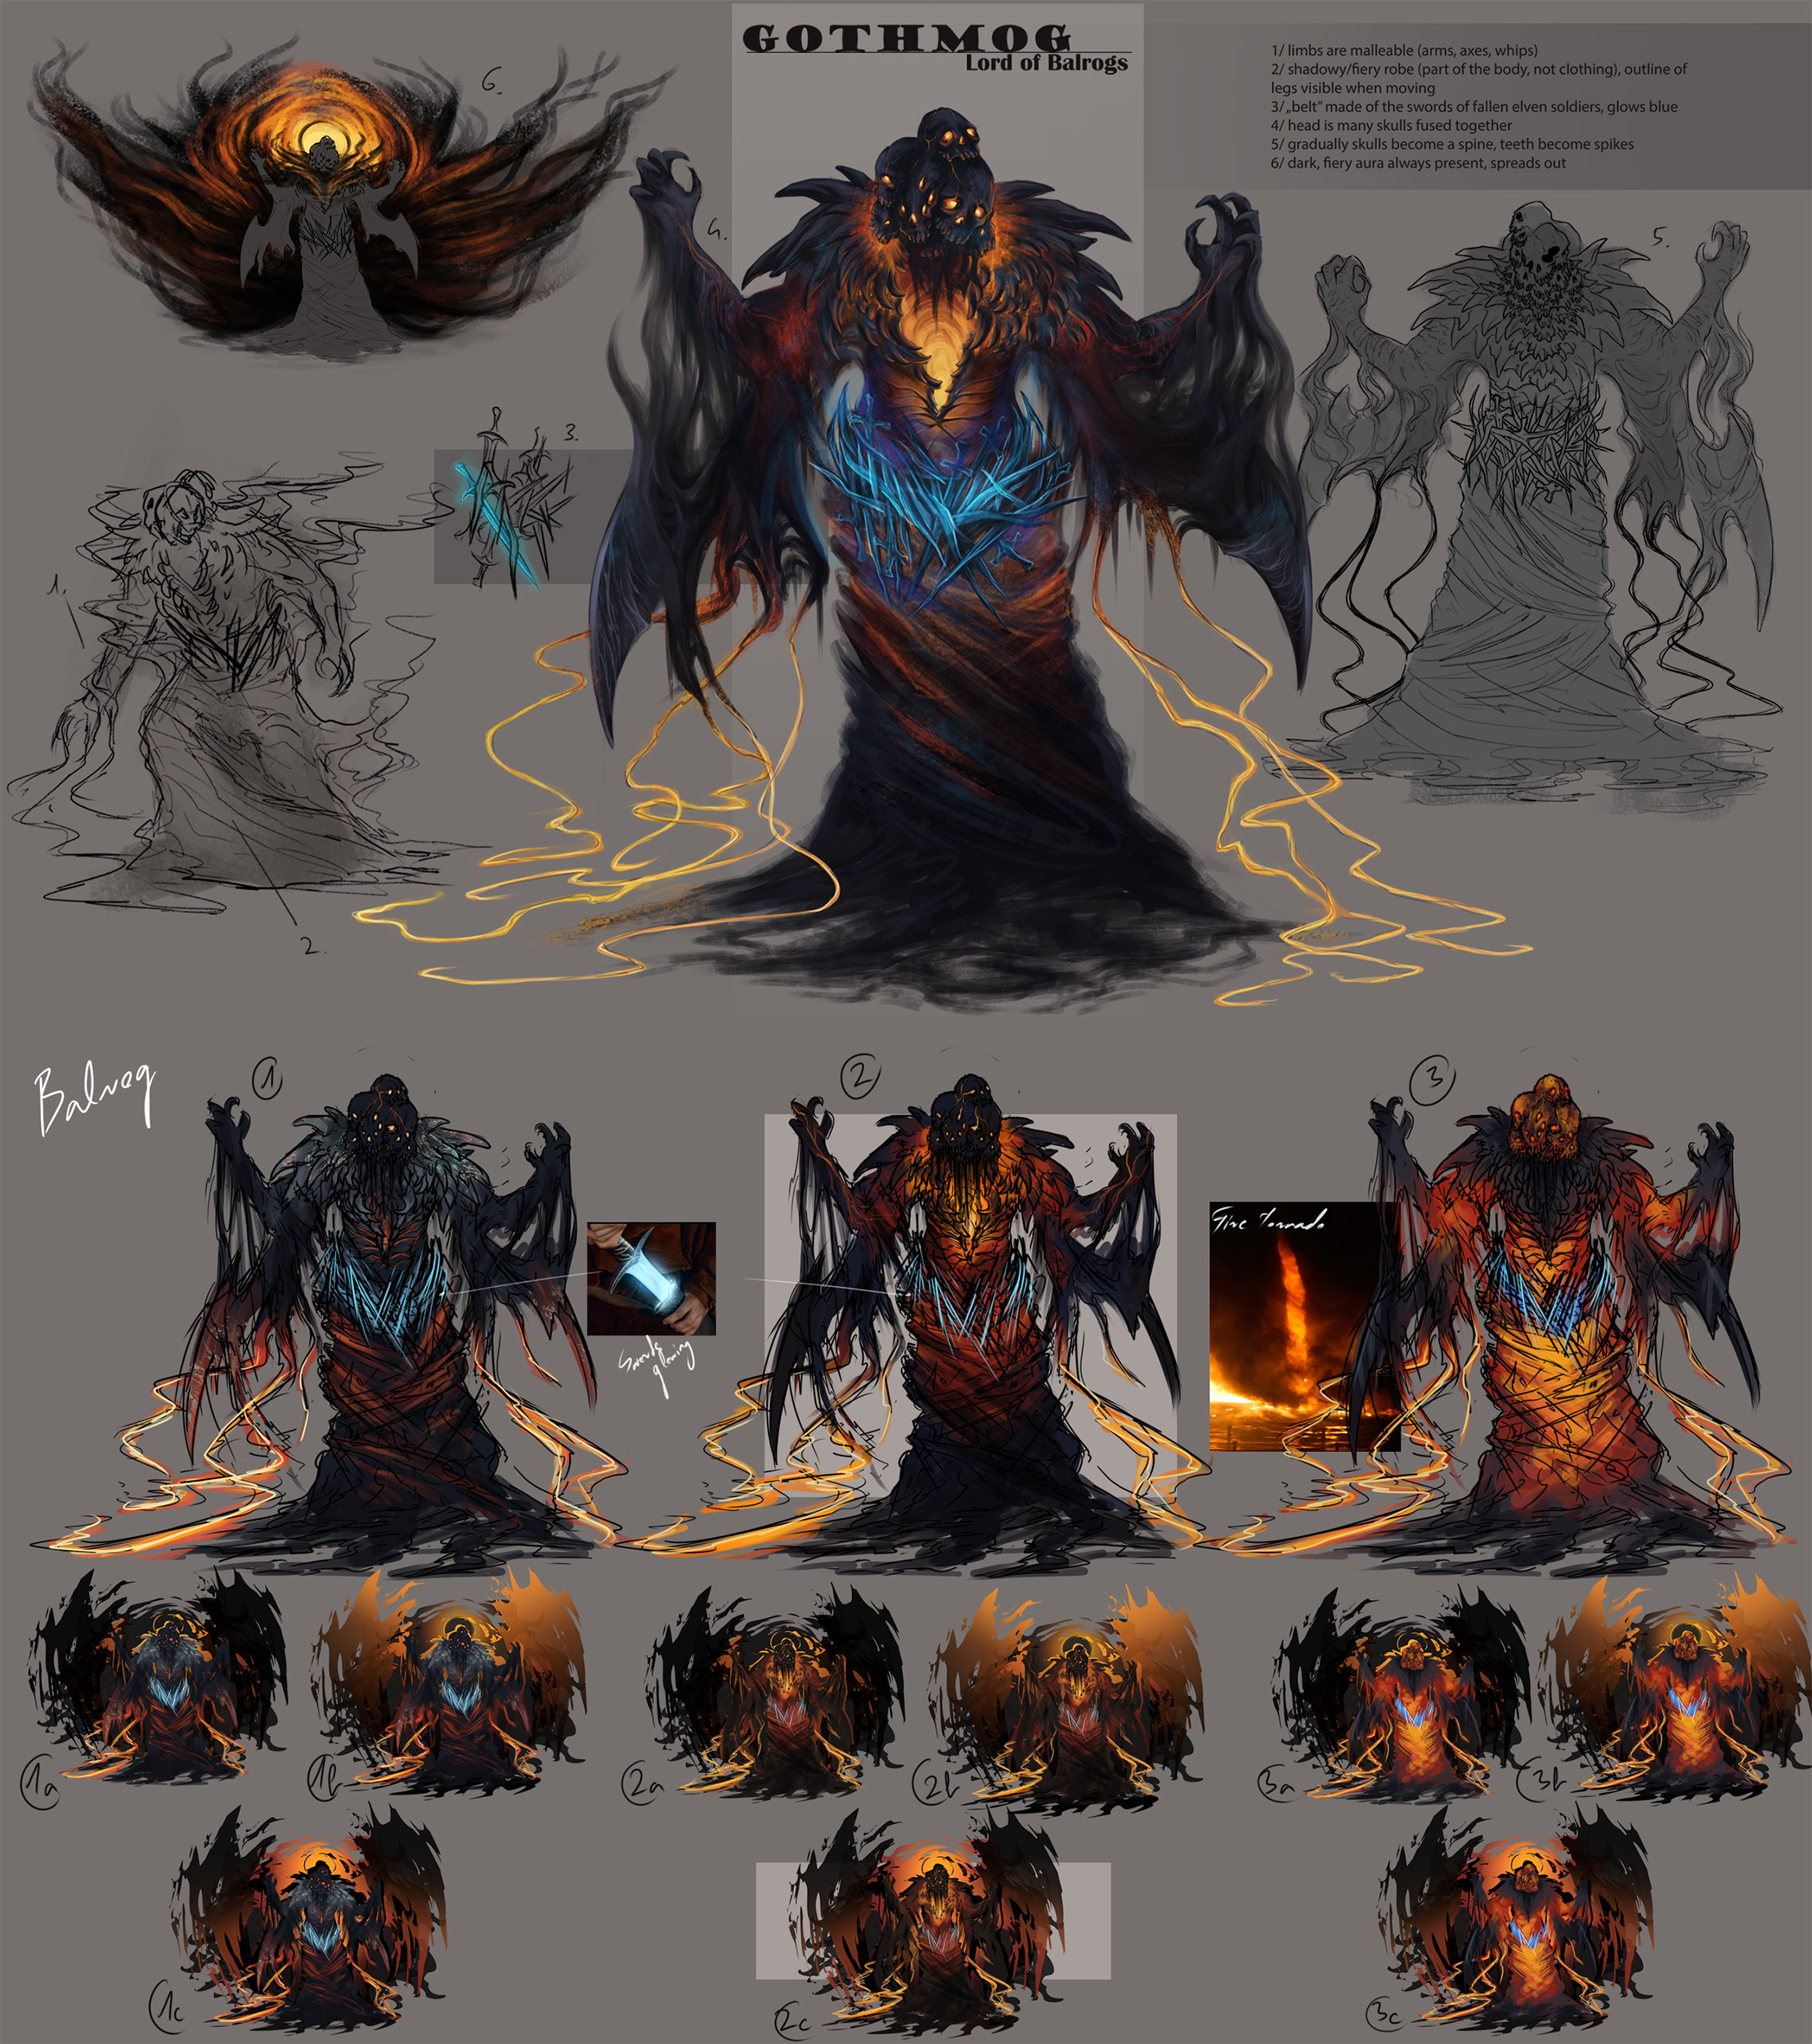 Character sheet depicting a humanoid creature. It's black with skulls fused together as its head, fiery eyes and chest, malleable limbs, and a lower body made of smoke.